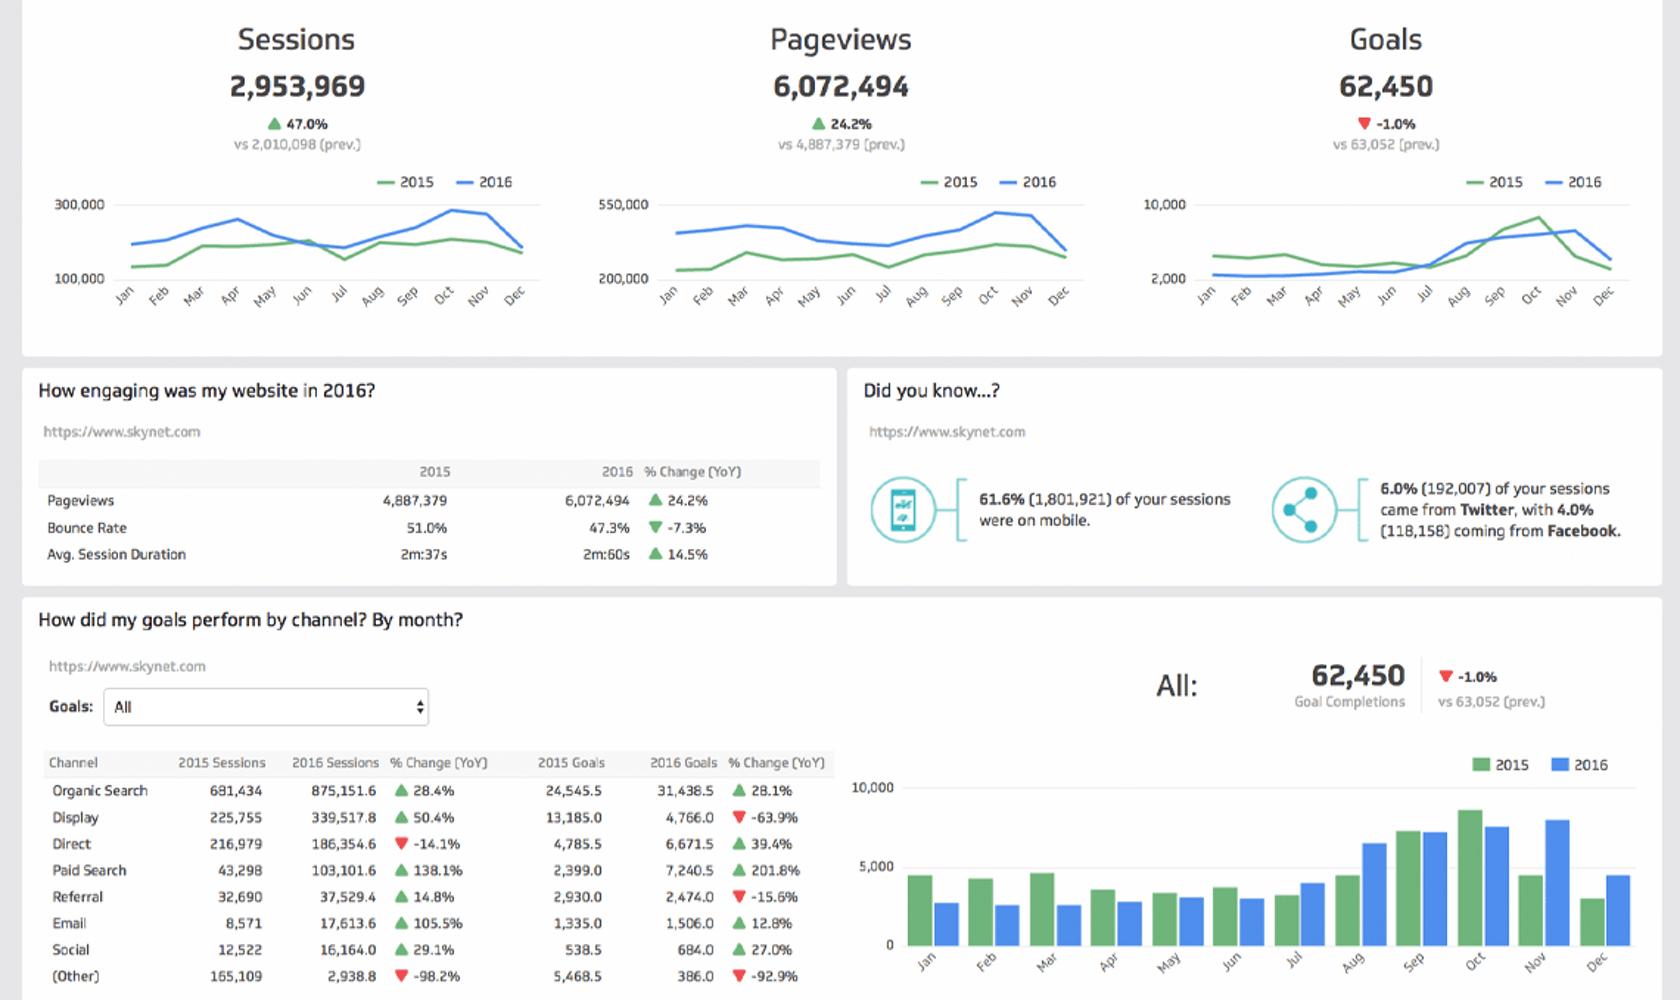 Dashboard design UX applied with regards to readability and an understanding of the data